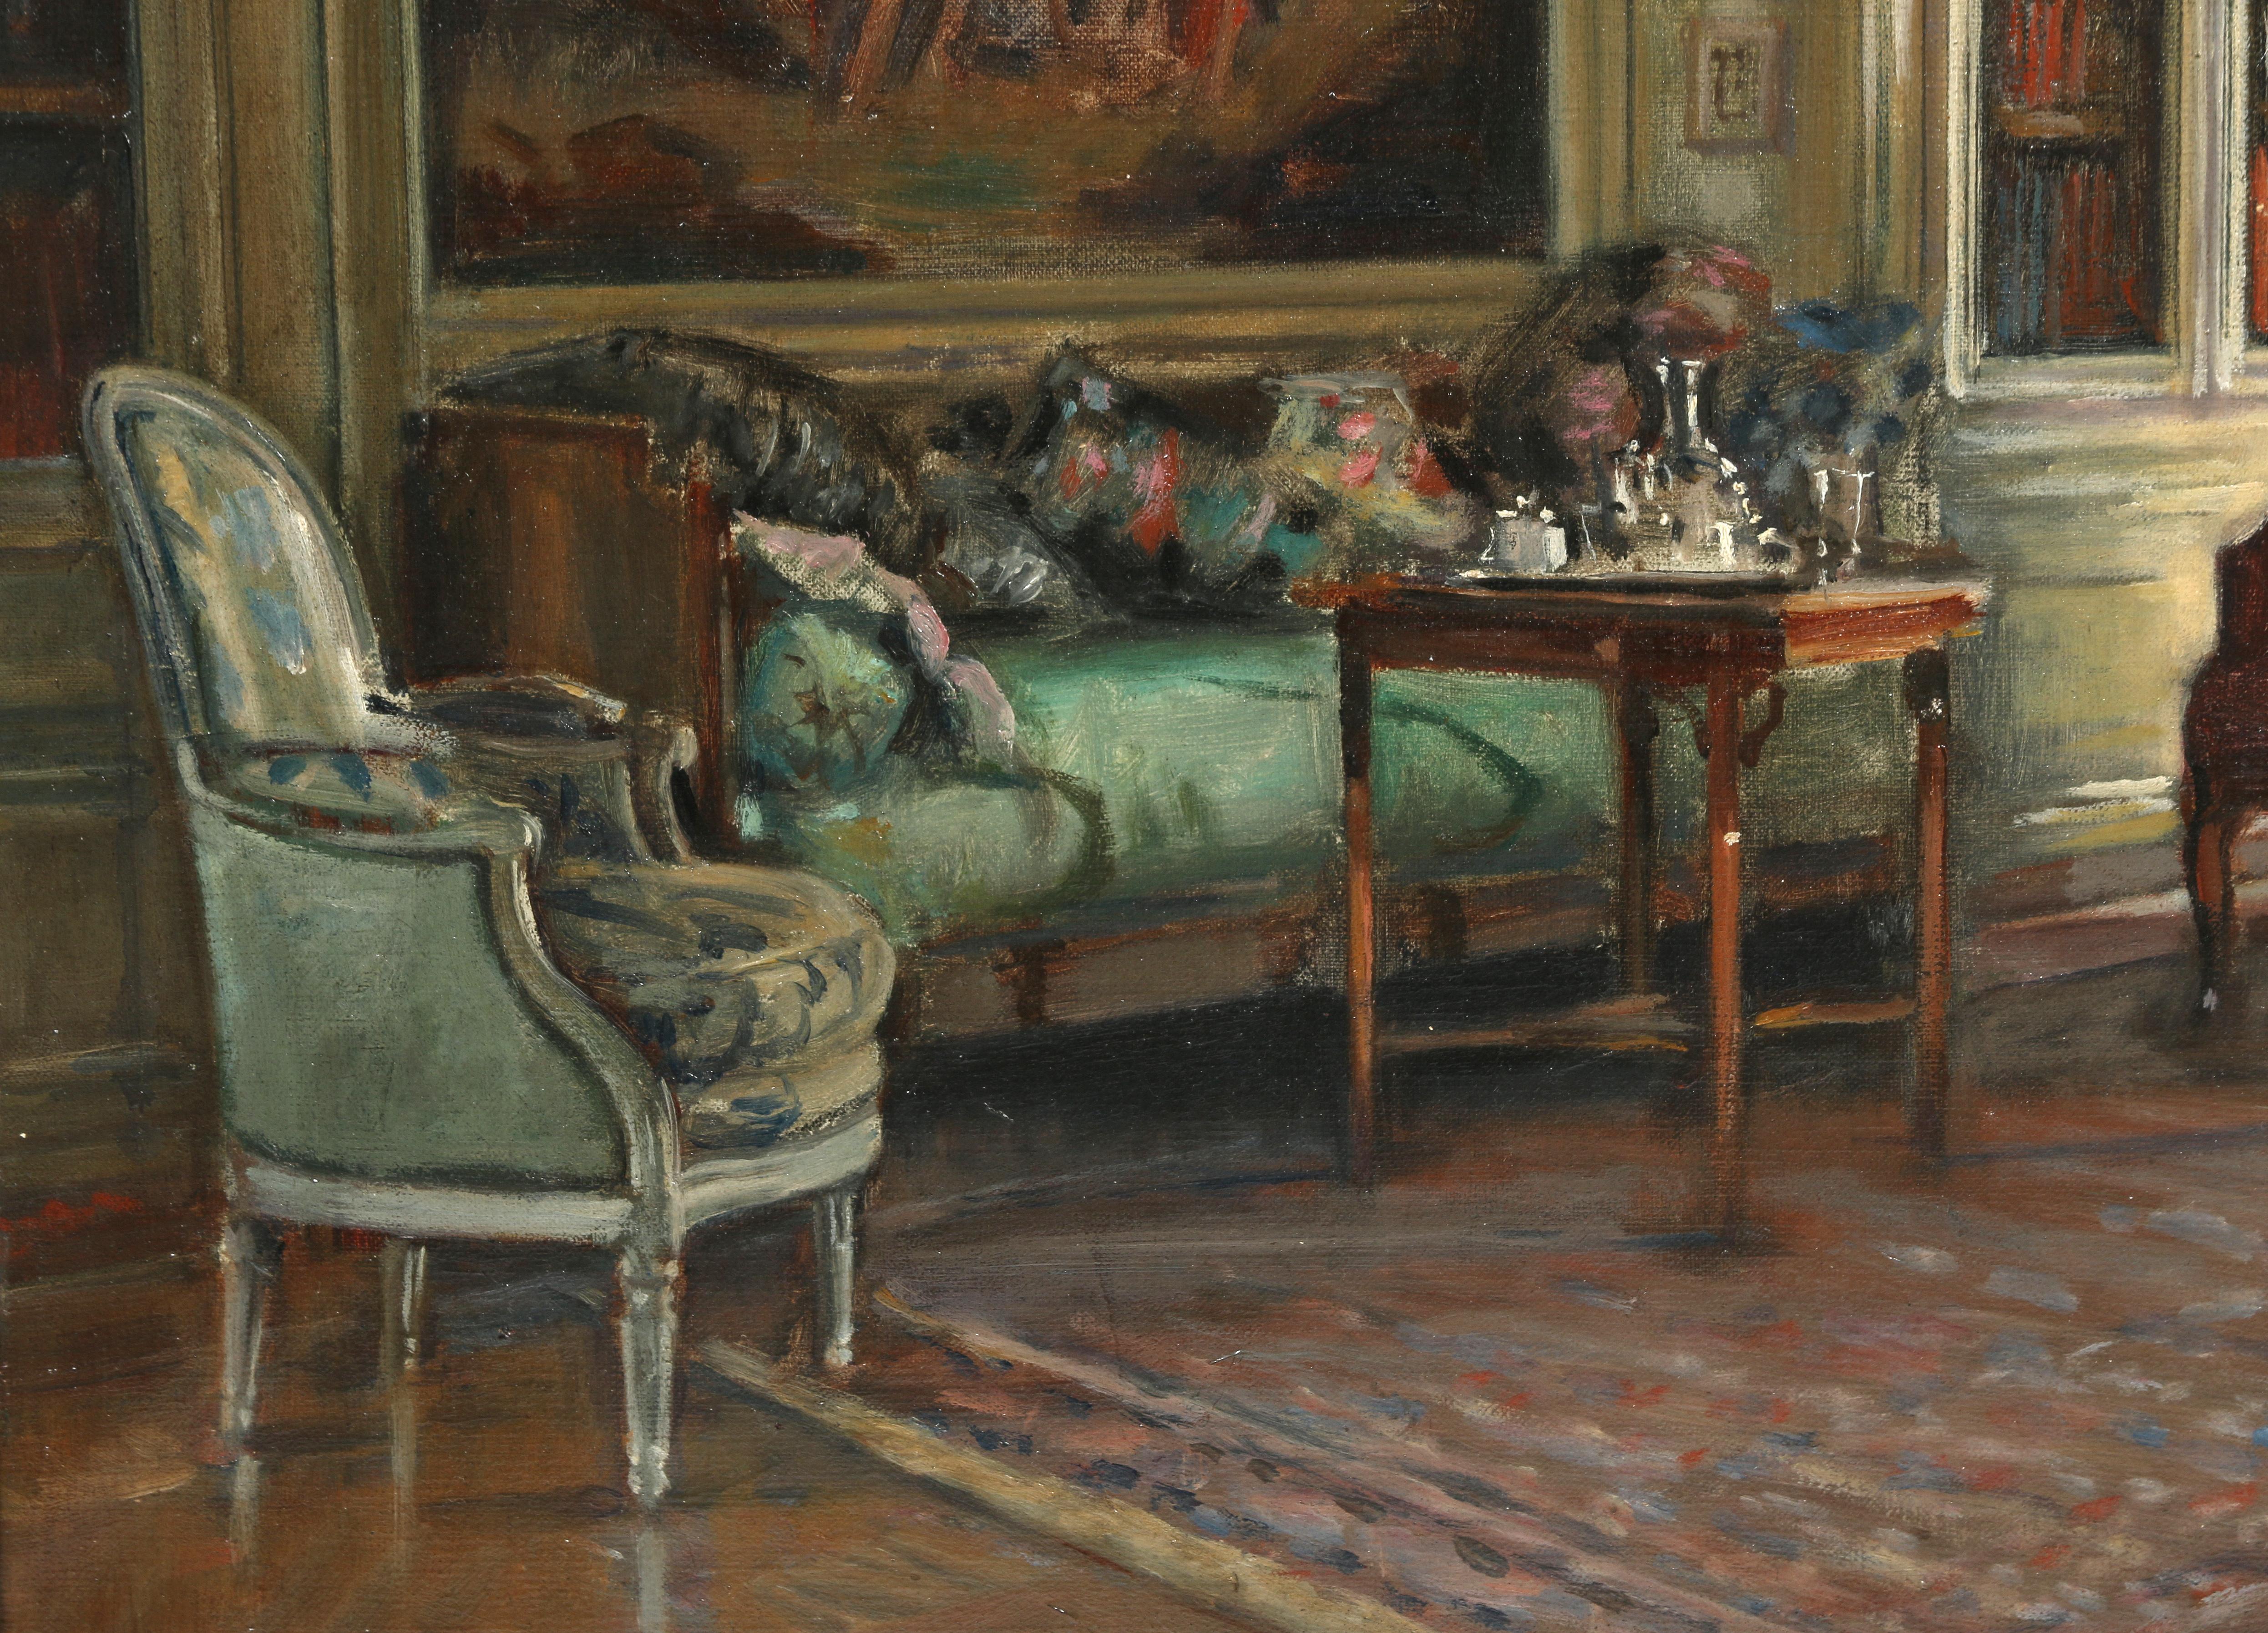 This painting by Charles Henry Tenré, invites the viewer into a stately room in a 19th century 